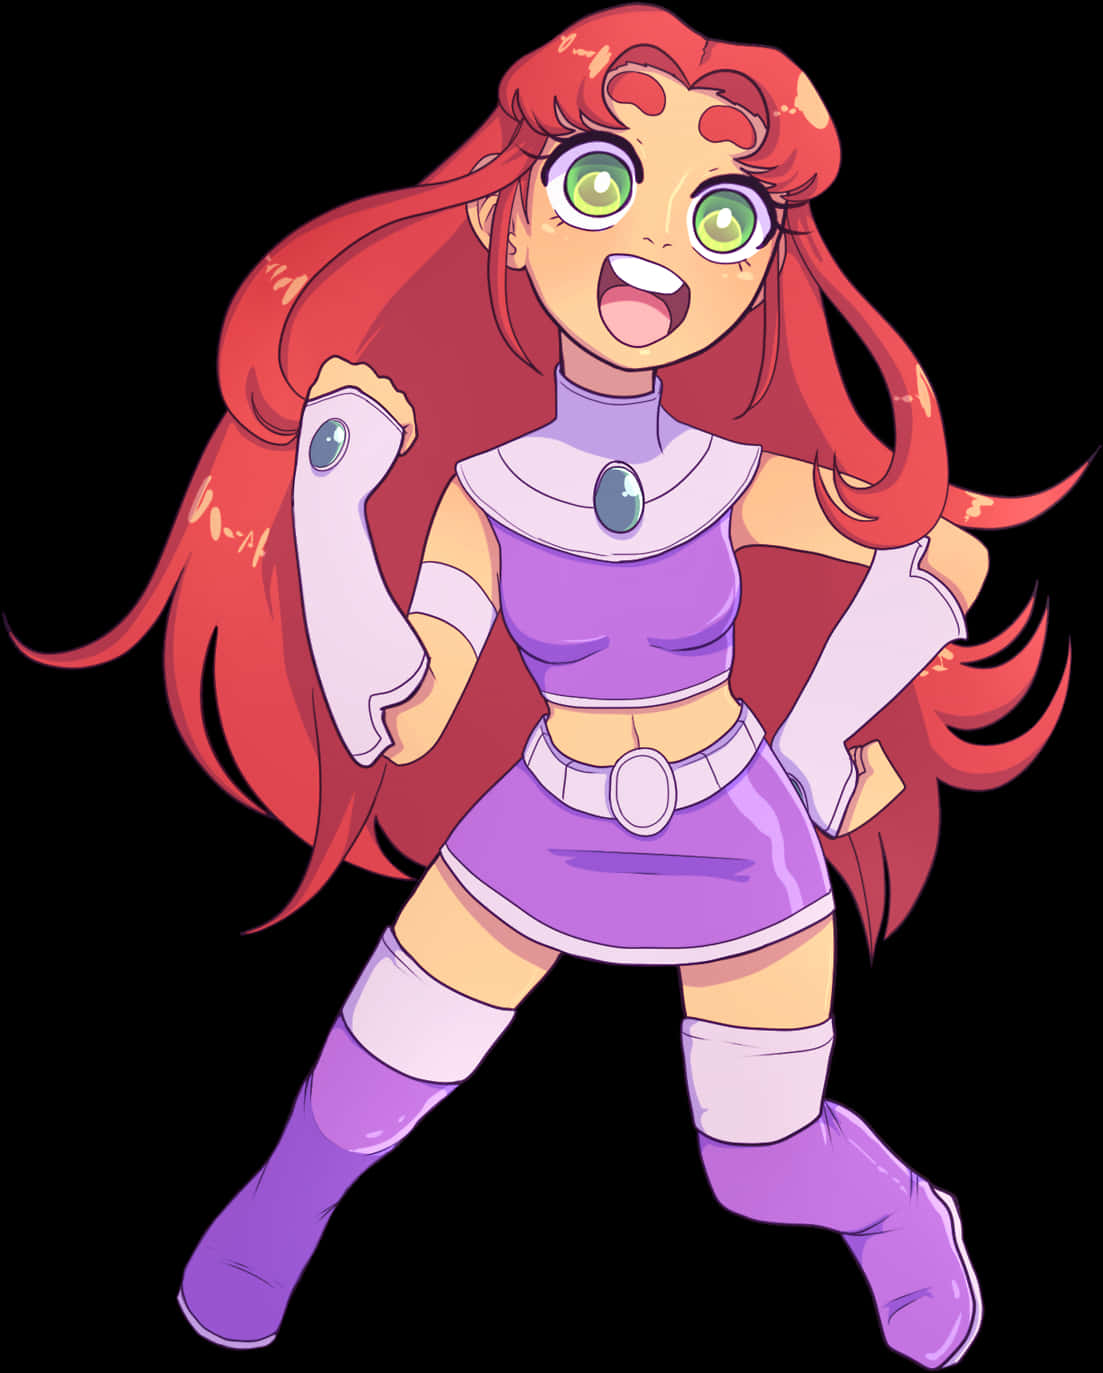 Cartoon Of A Girl With Long Red Hair